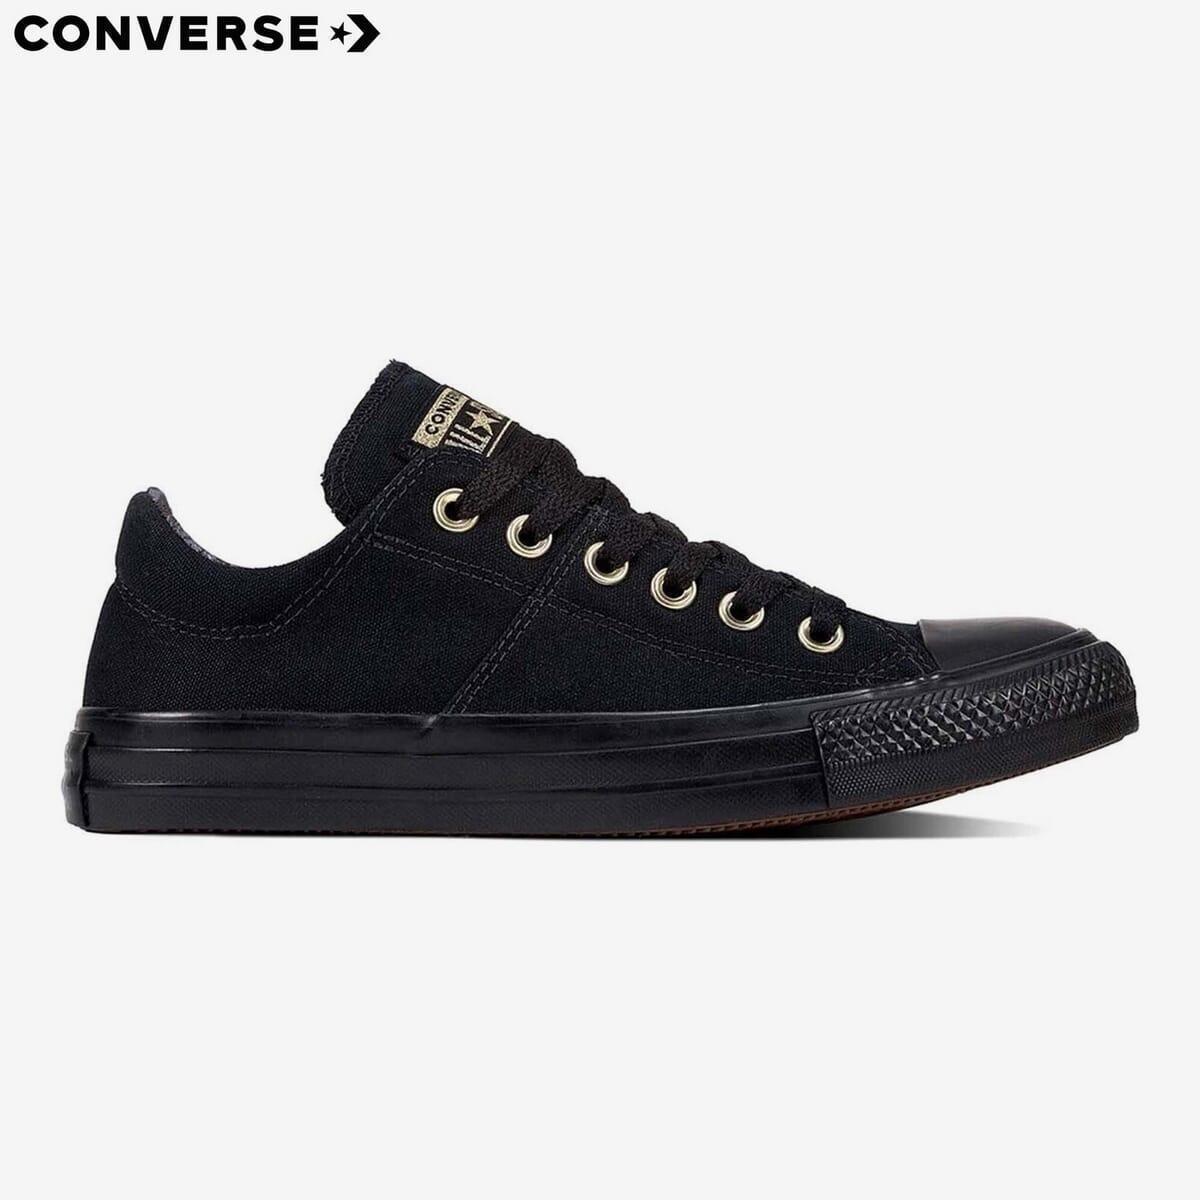 converse chuck taylor all star madison ox black shoes for women 561742c